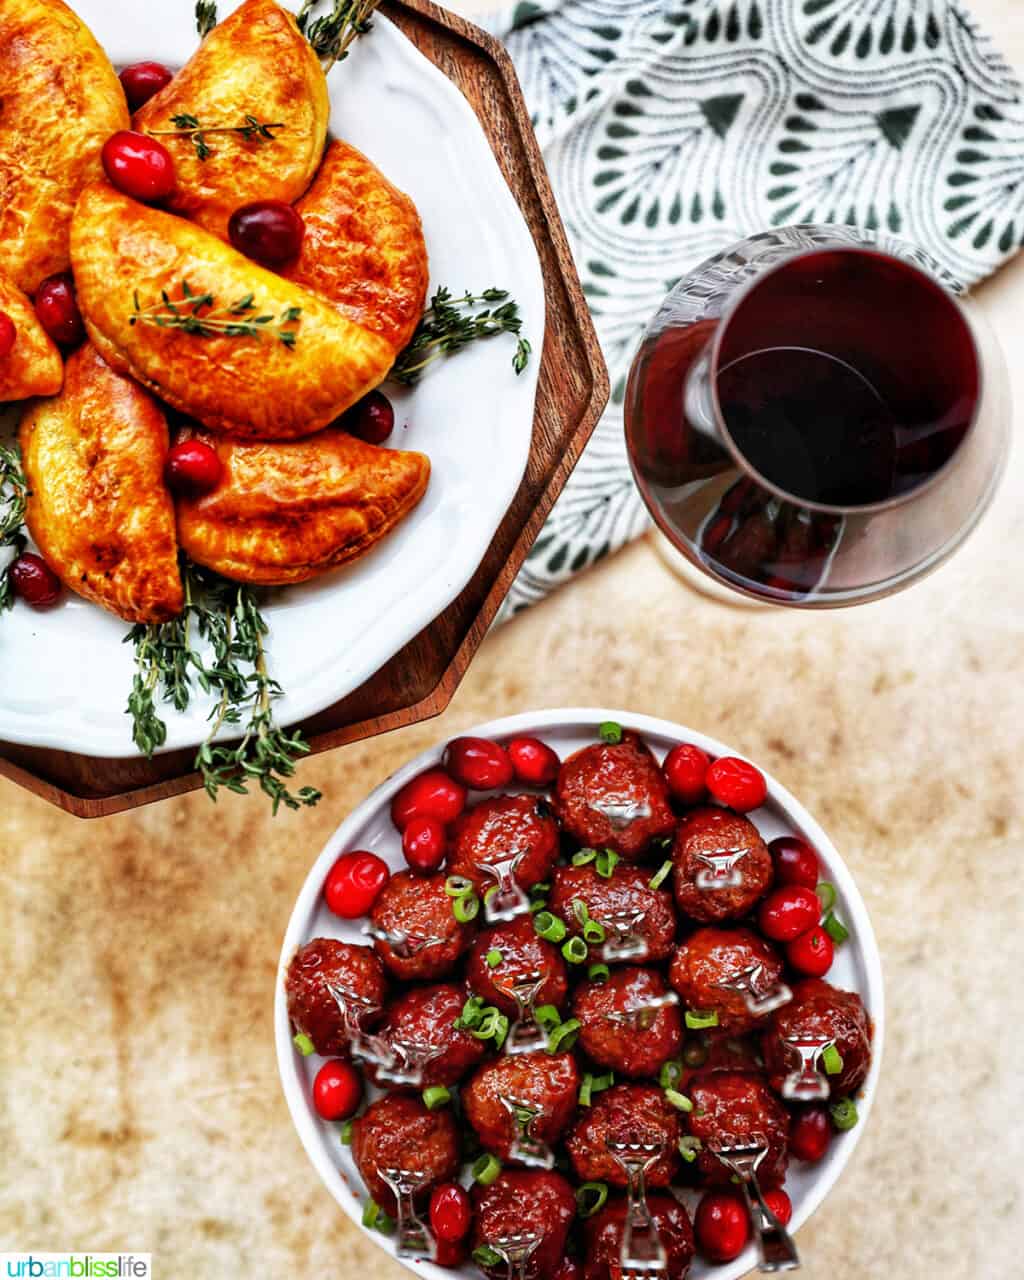 holiday appetizers of cranberry meatballs, mushroom empanadas, and glass of red wine